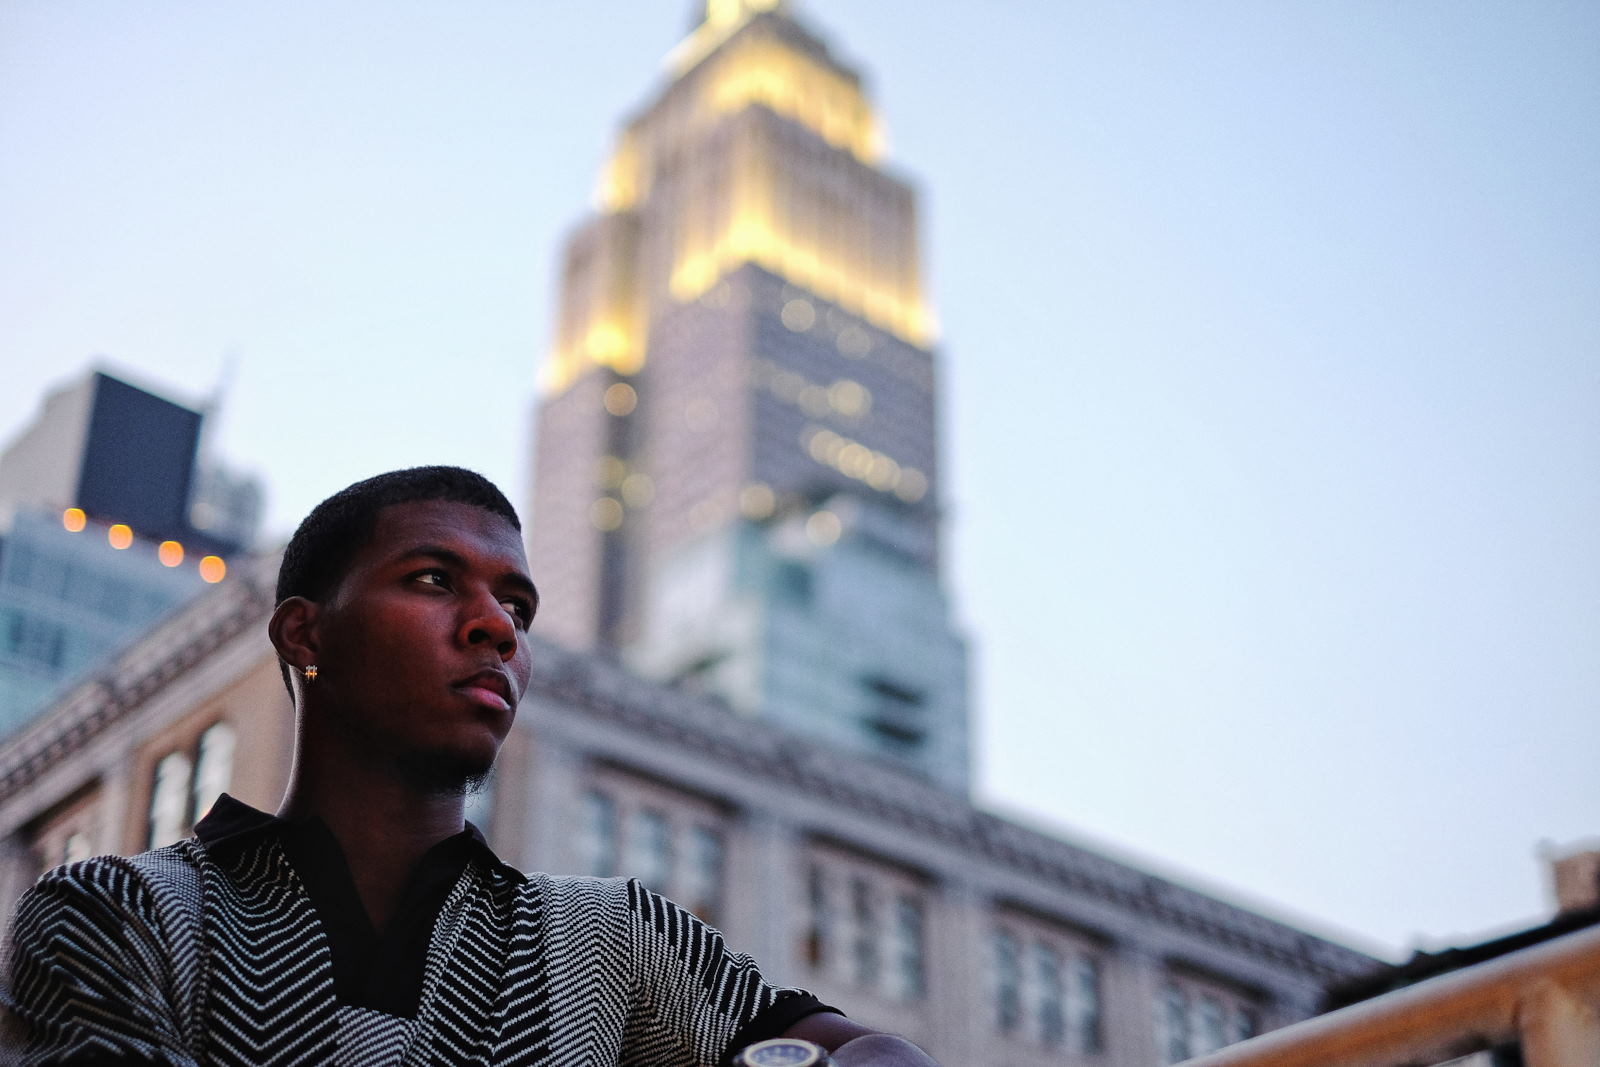 On dusk, penthouse terrace Manhattan, Empire State building in the background - Menswear photoshoot at at The Roger Hotel NYC for fashion label Mario&Lee. Photography by Kent Johnson.